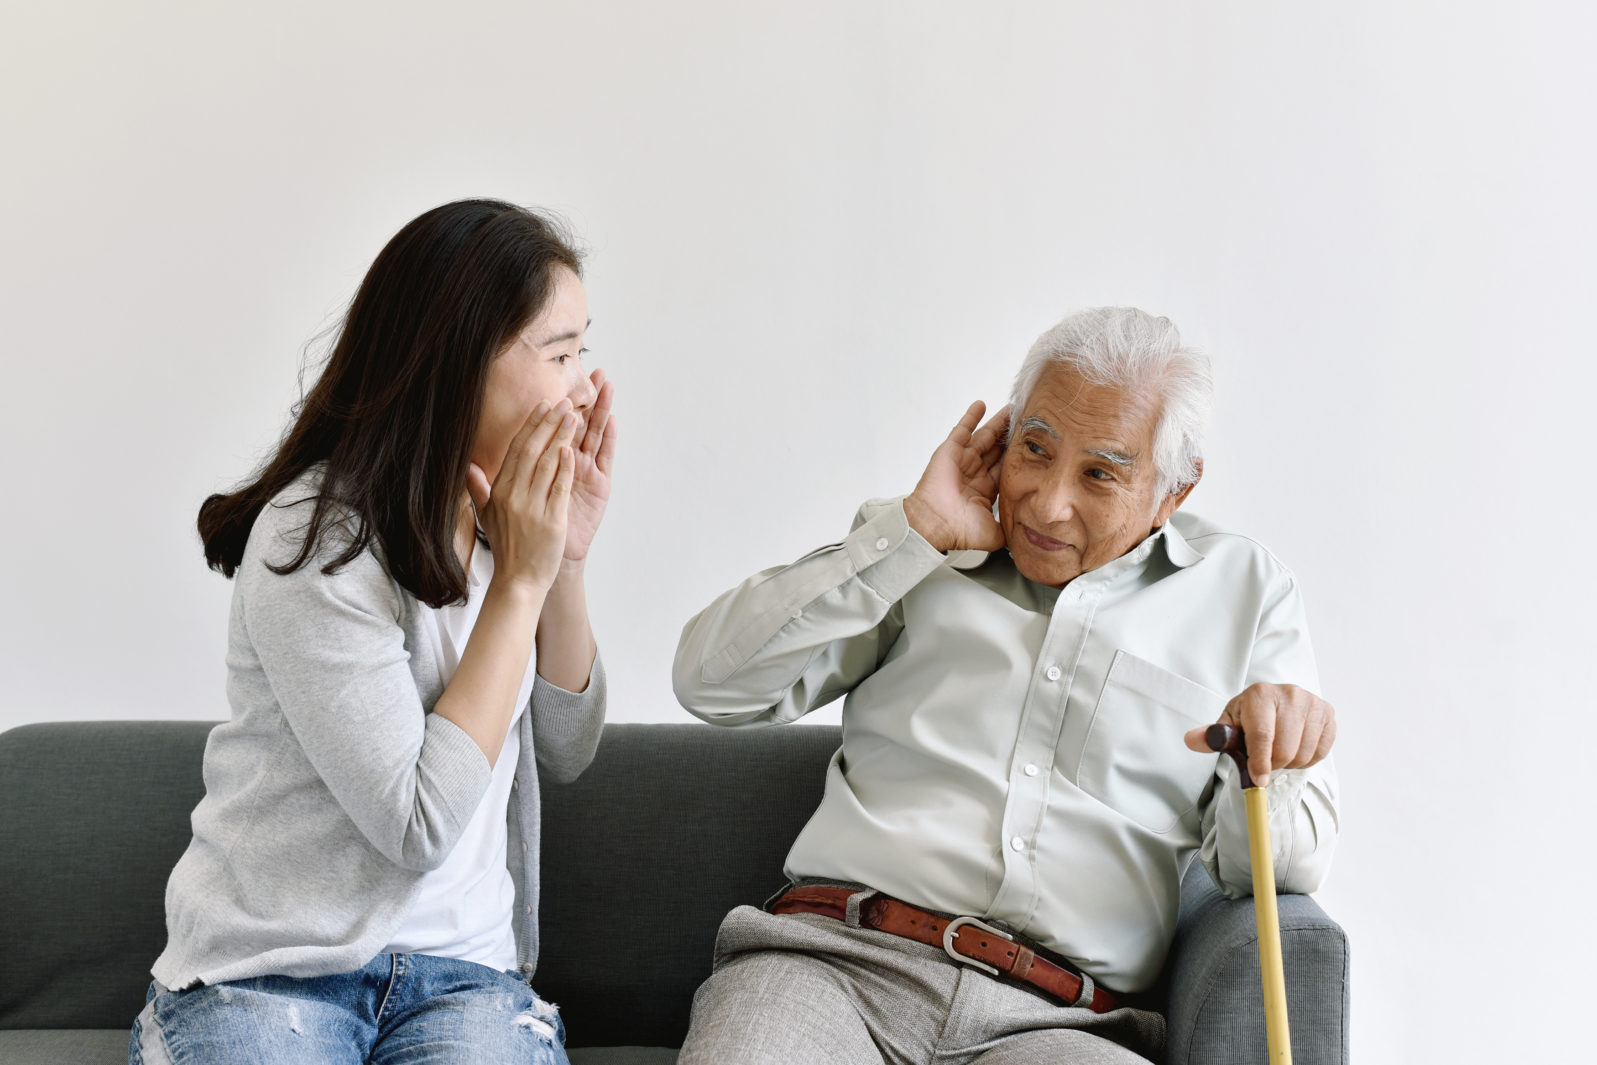 Hearing loss problem, Asian old man with hand on ear gesture trying to listen shouting woman, Aging senior decline in hearing ability, Elderly health problems concept.